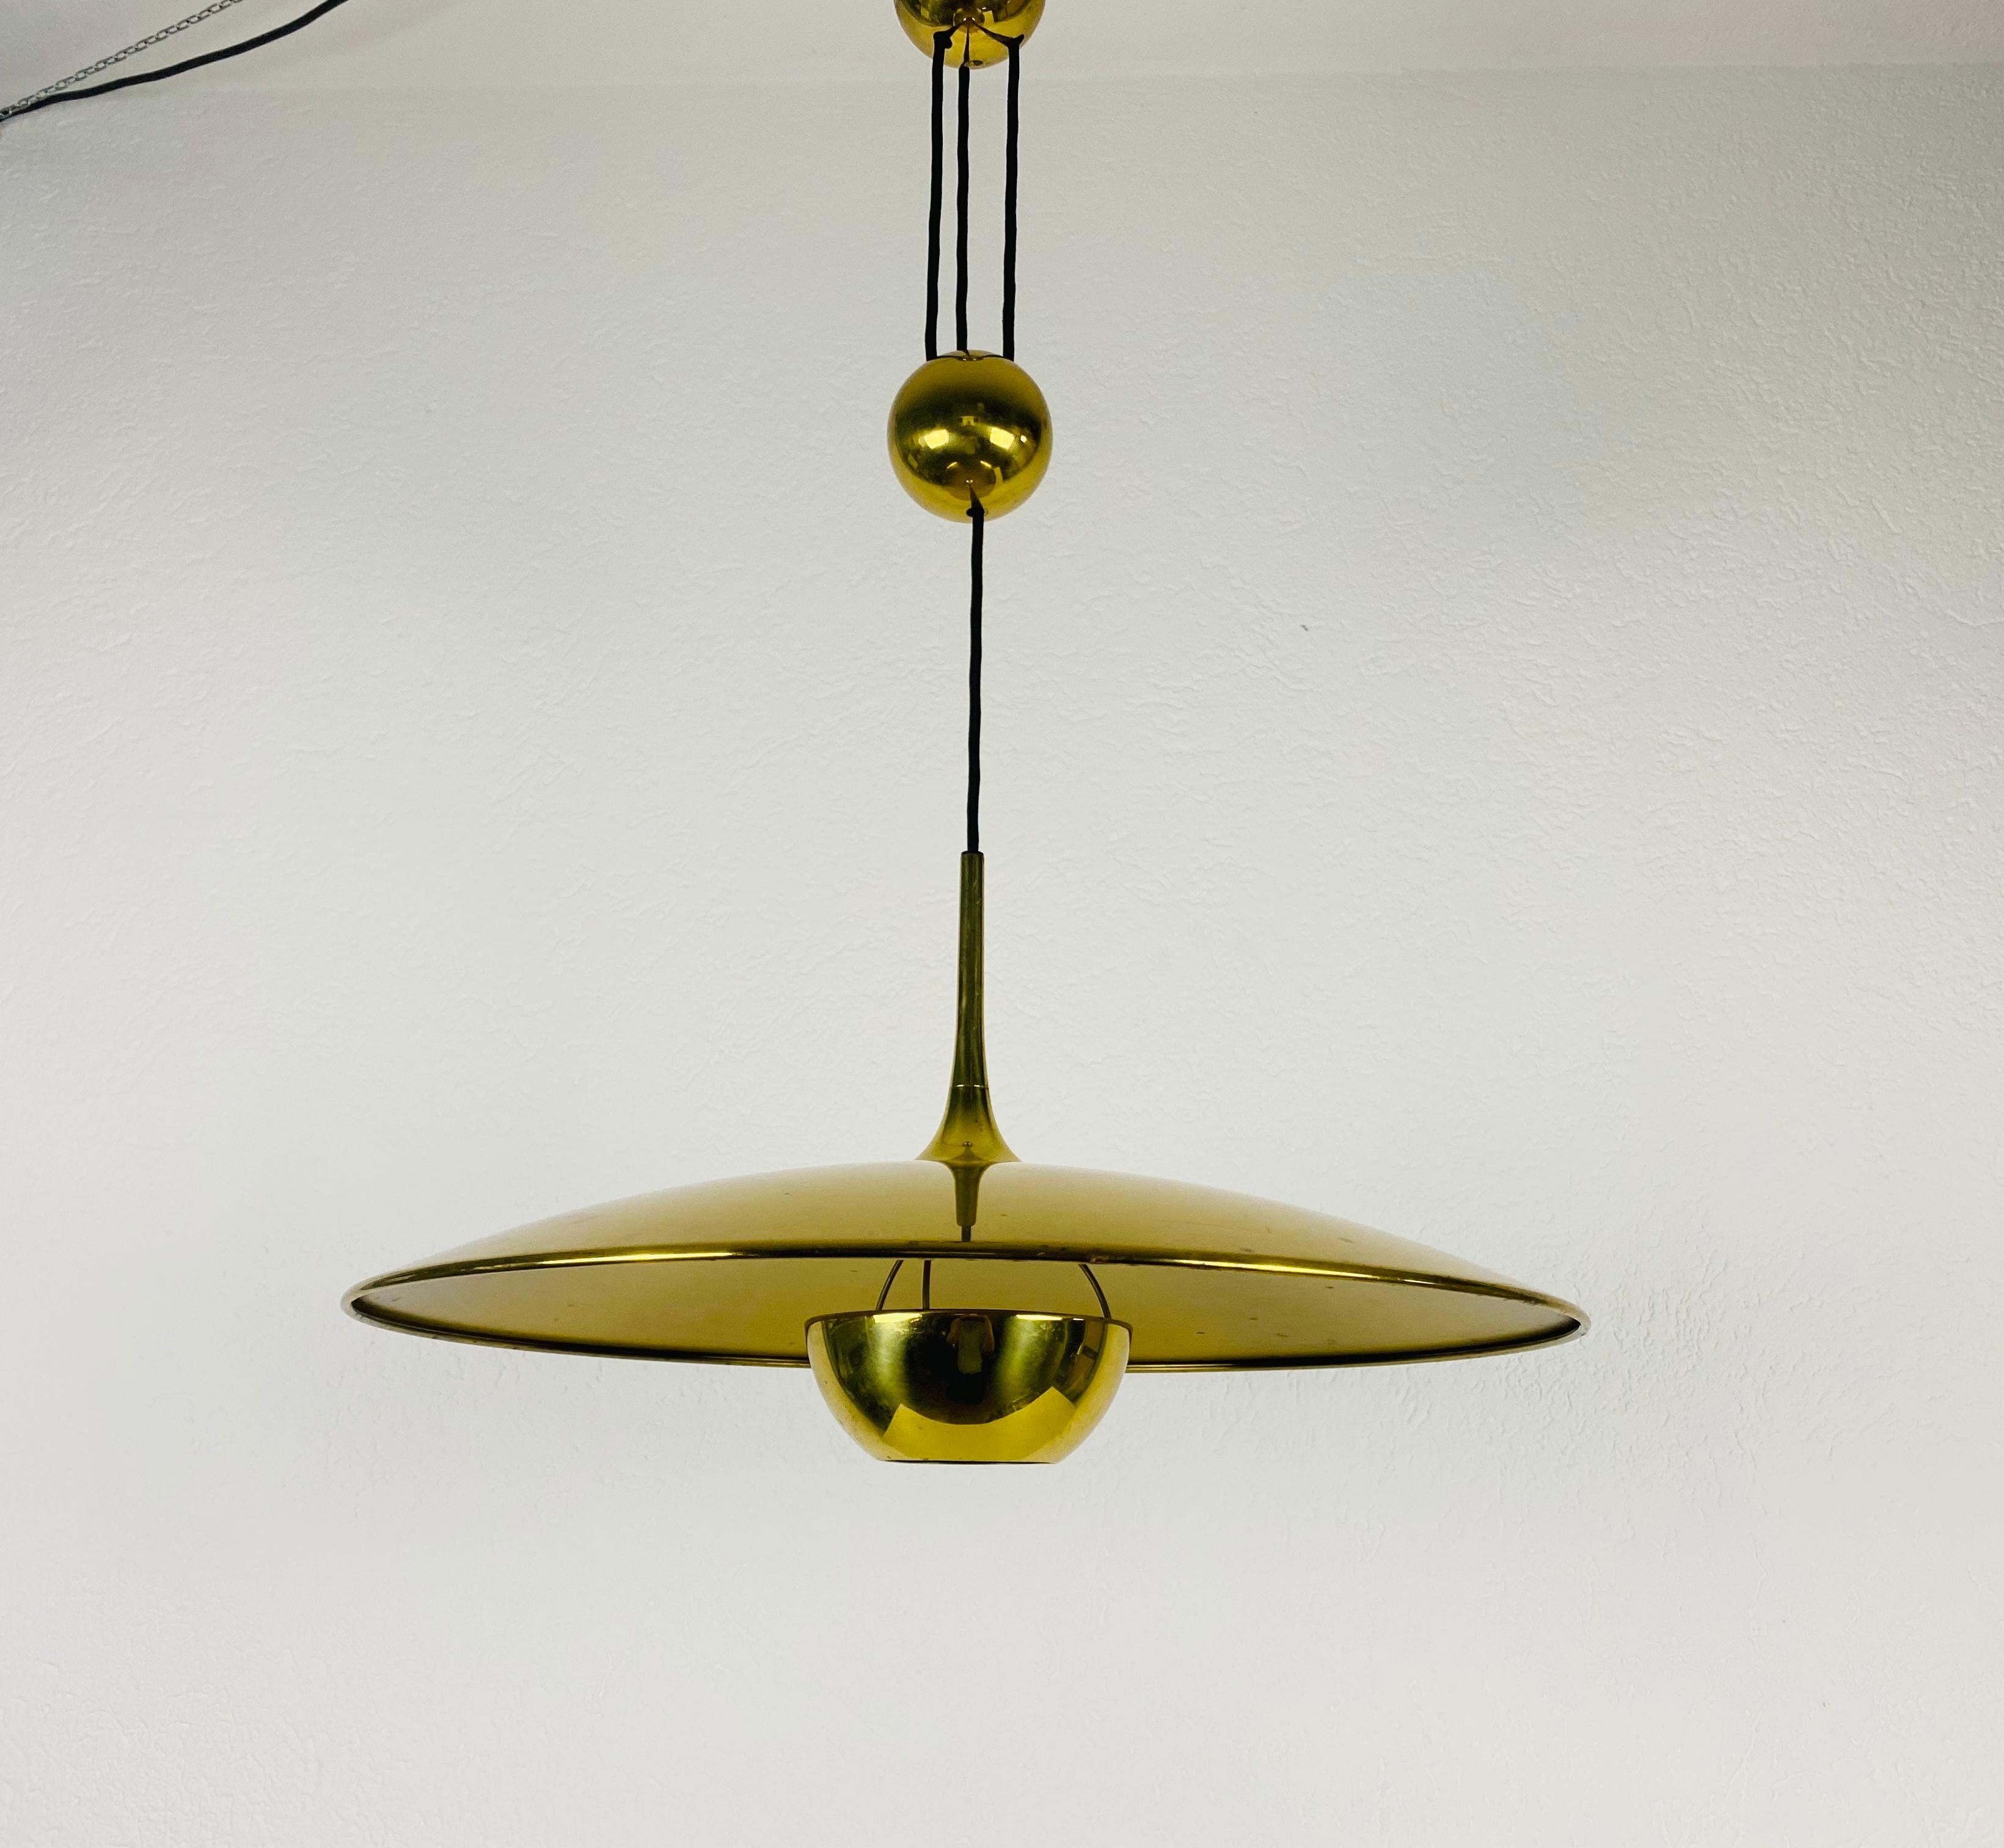 'Onos 55' Brass Pendant Lamp with Counterweight by Florian Schulz, 1970s Germany 7